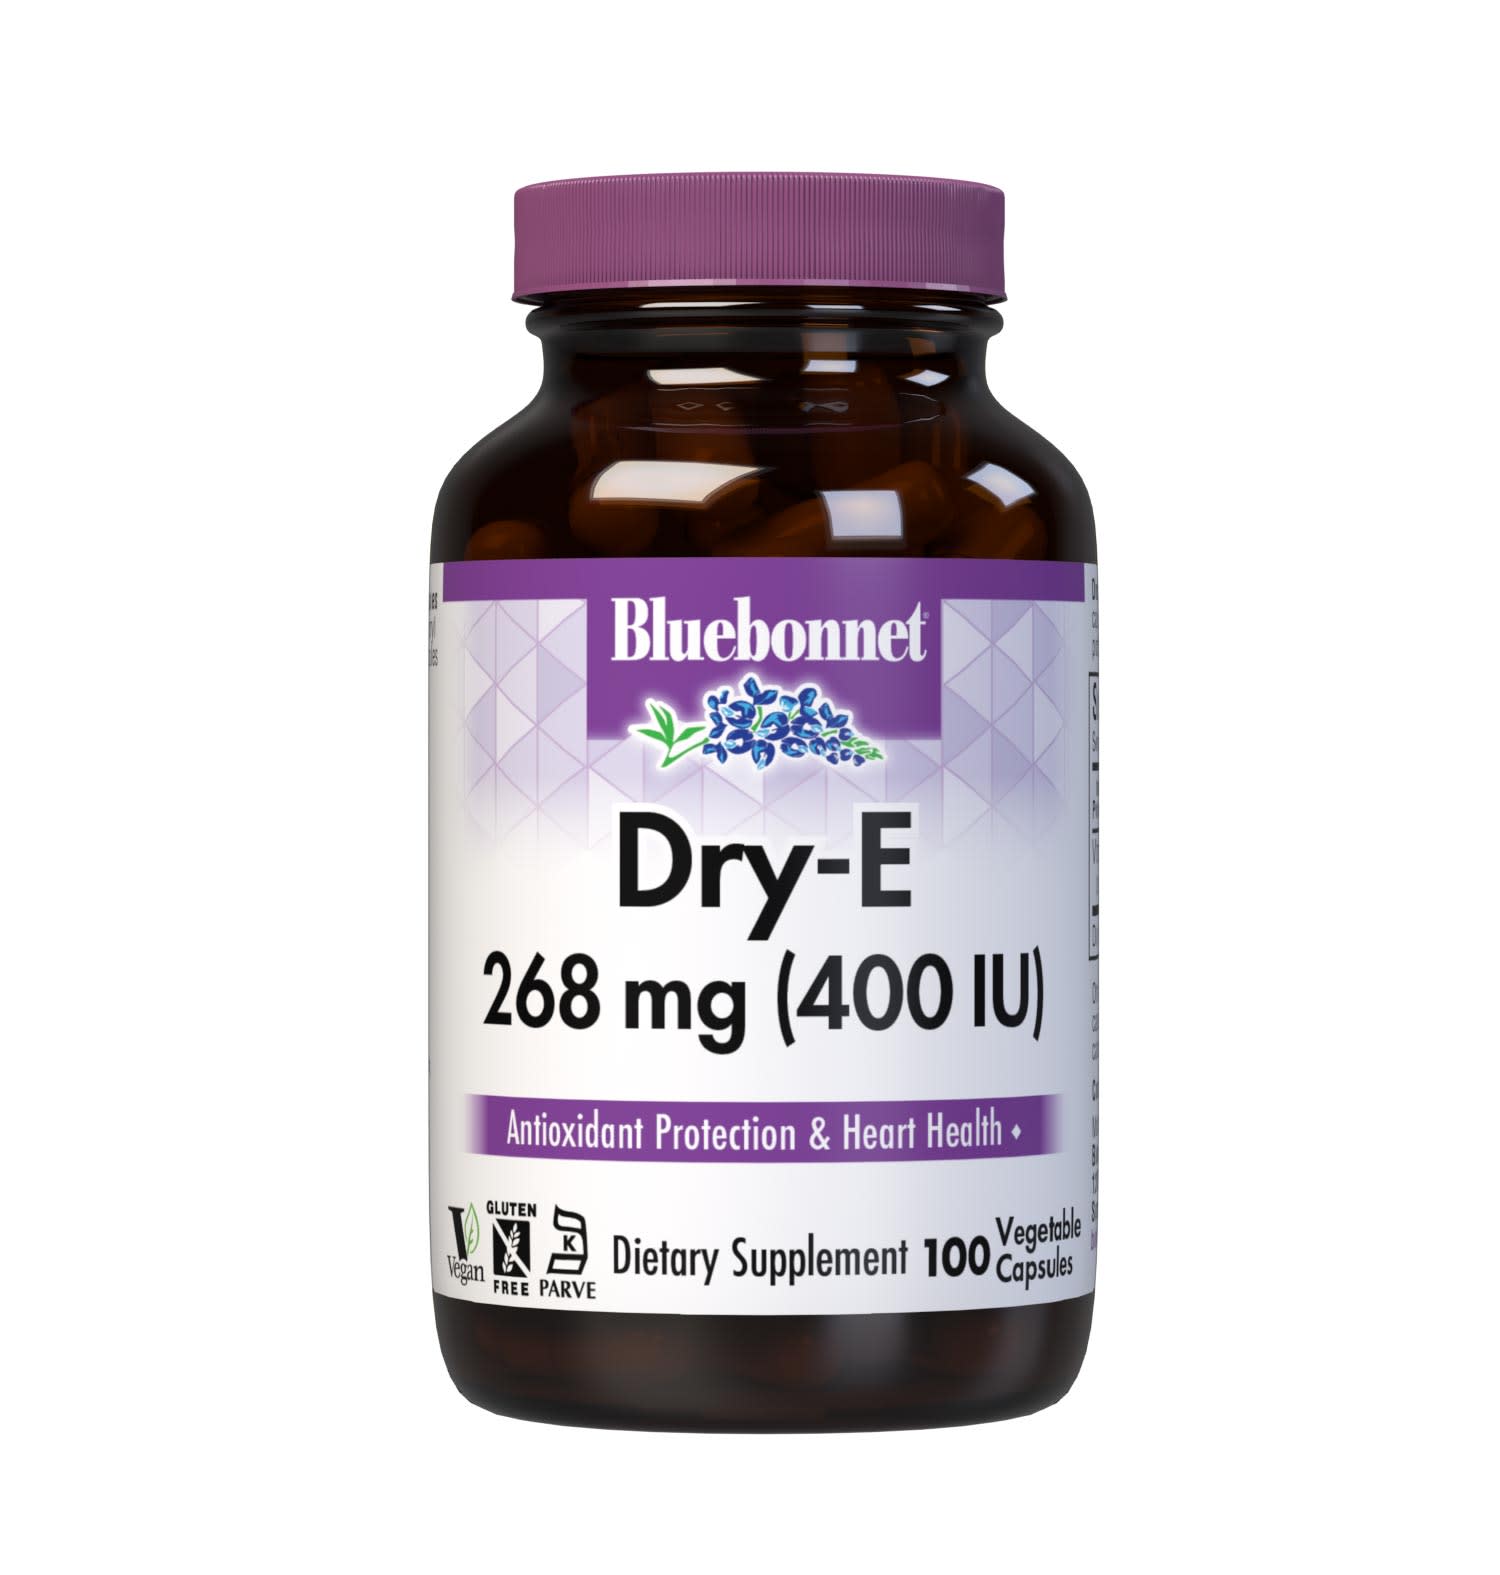 Bluebonnet’s Dry E-268 mg (400 lU) d-Alpha Tocopheryl 100 Vegetable Capsules are formulated with vitamin E from oil-free d-alpha tocopheryl succinate. Vitamin E is an antioxidant that provides free radical protection as well as cardiovascular support. #size_100 count